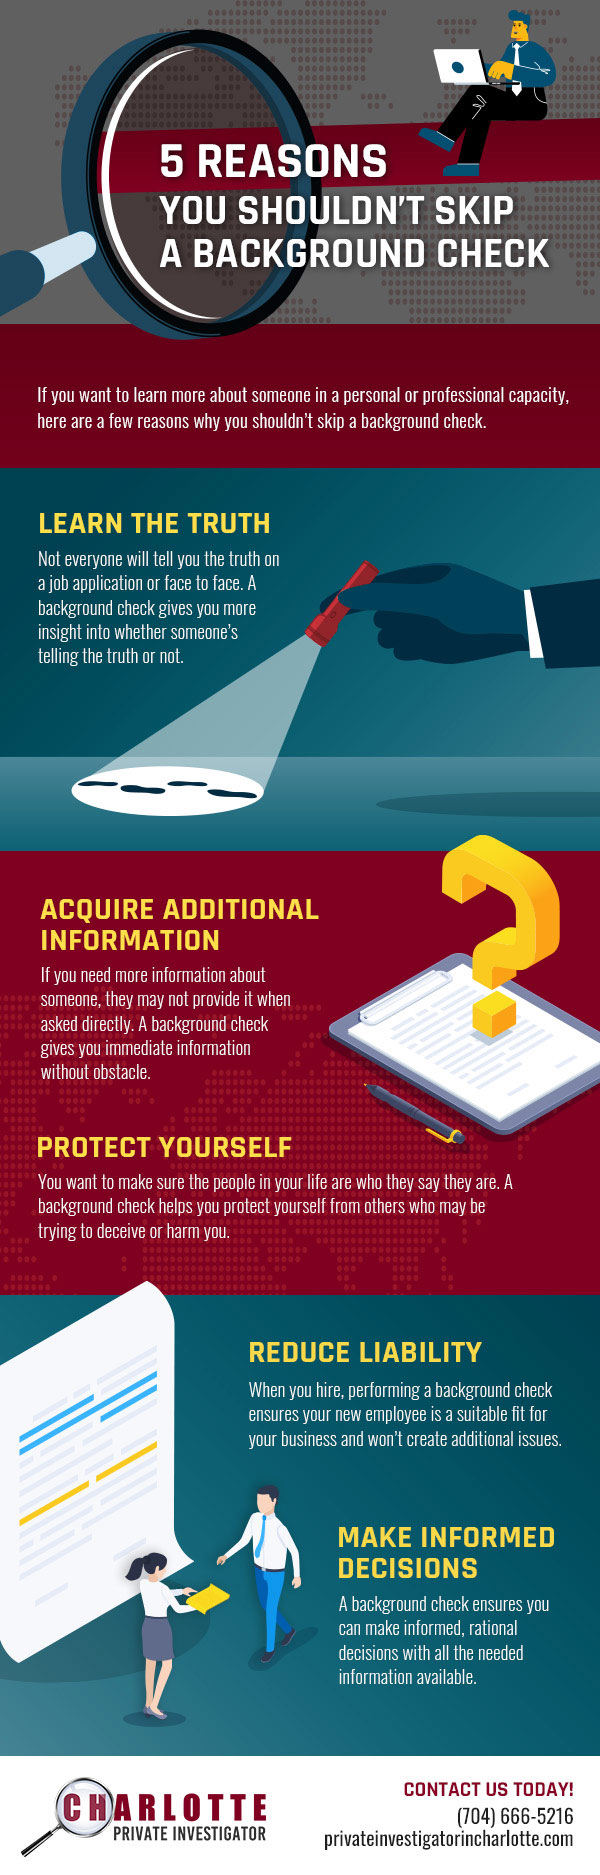 5 Situations When You’ll Want to Hire a Private Investigator to Get More Info [infographic]